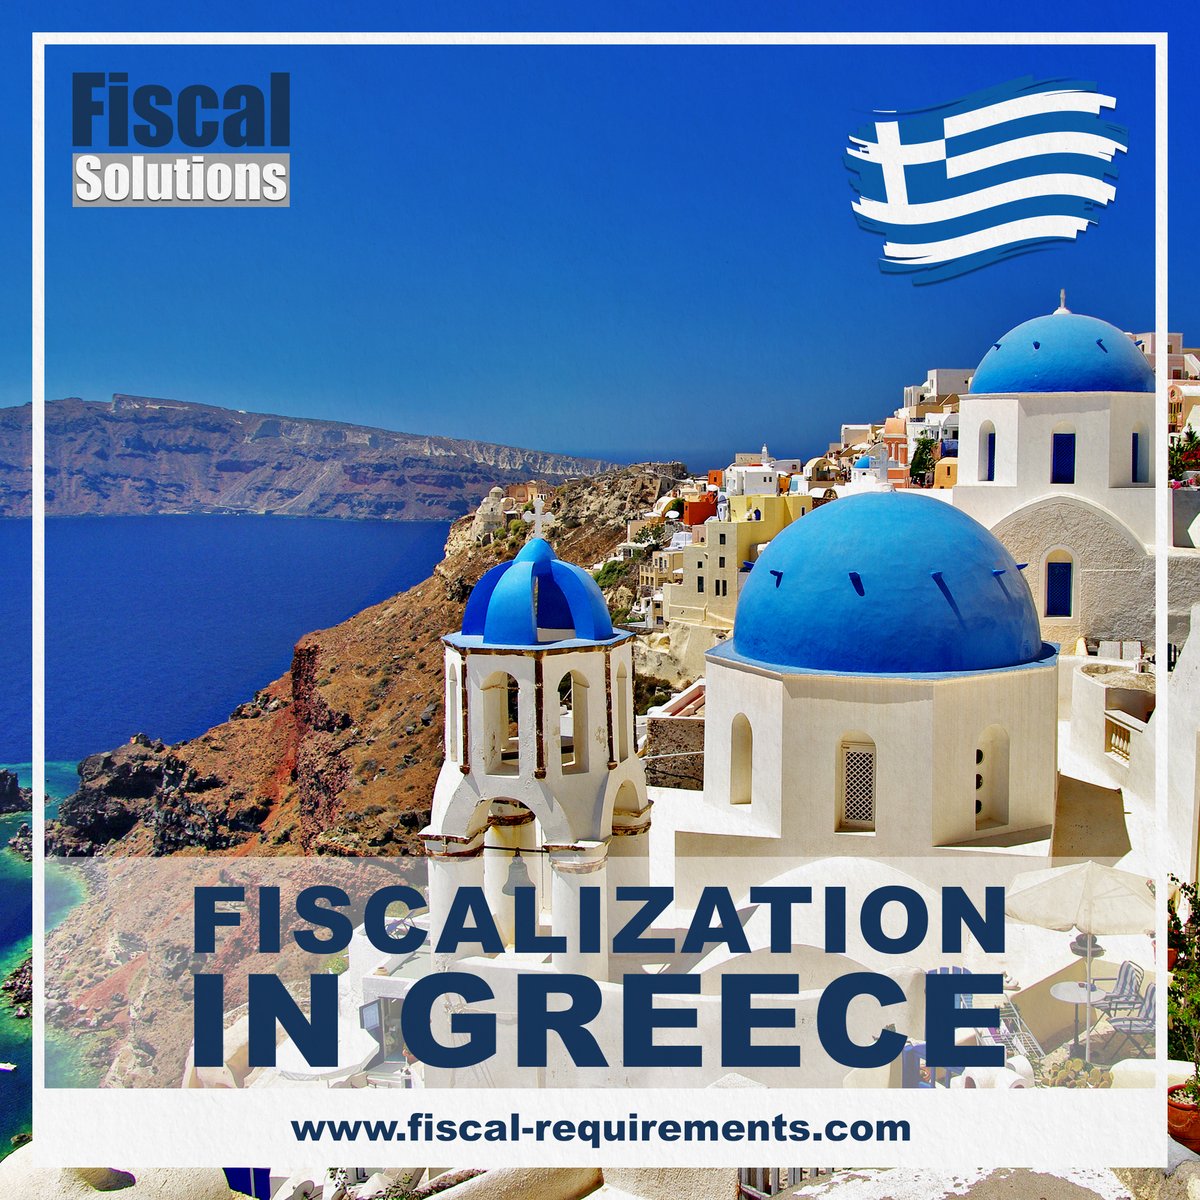 🇬🇷 Exciting News on Fiscalization in Greece 🇬🇷

1️⃣ Clarifying Obligations for POS and Instant Payment Services

Have questions about Greece's new obligations for POS card terminals and instant payment services? Here's the breakdown:

➡ Who's obliged? Any entity dealing with…